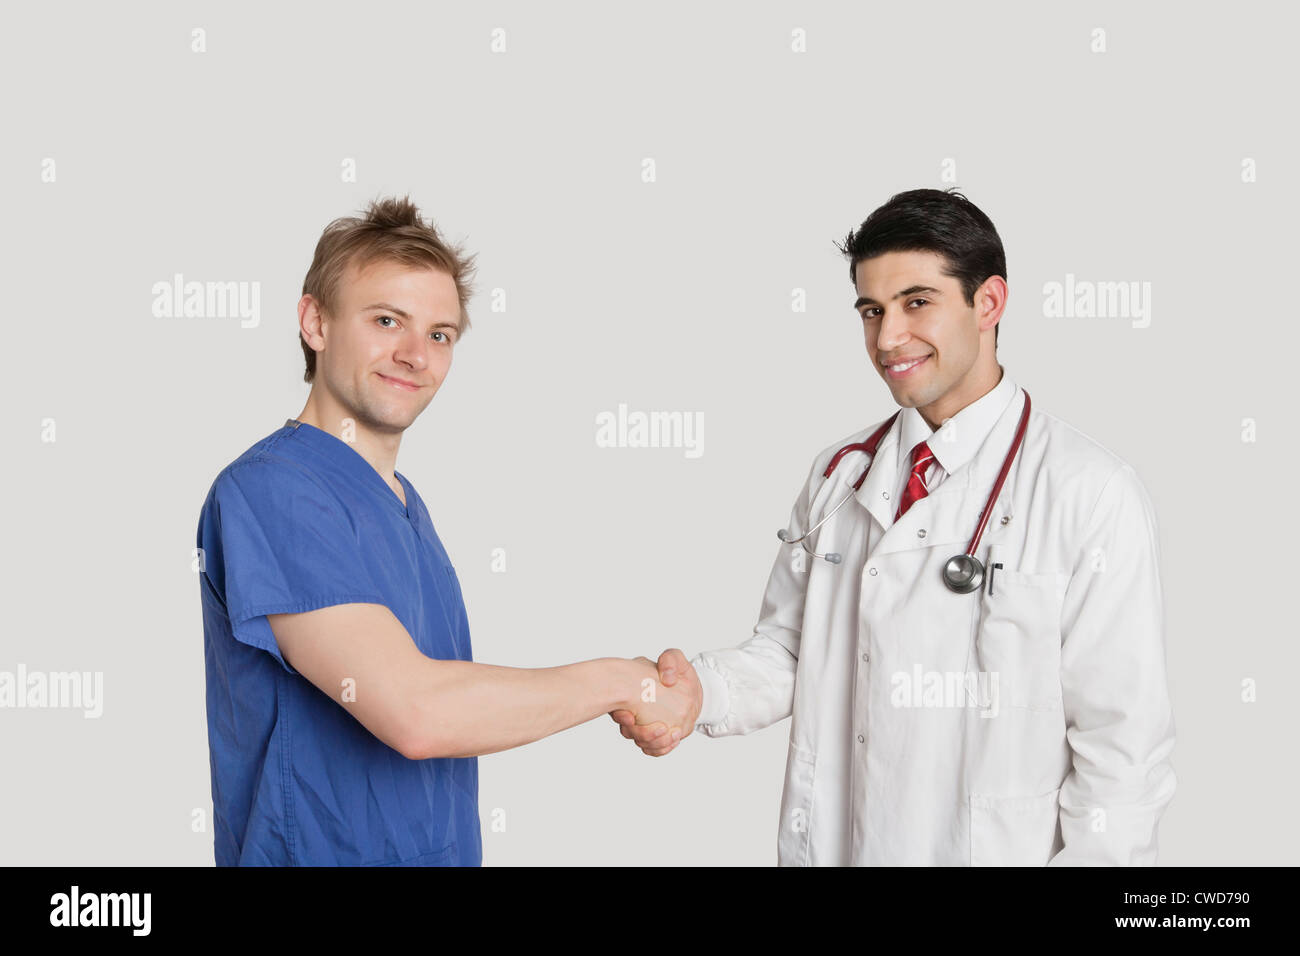 Portrait of doctor and male nurse shaking hands over gray background Stock Photo